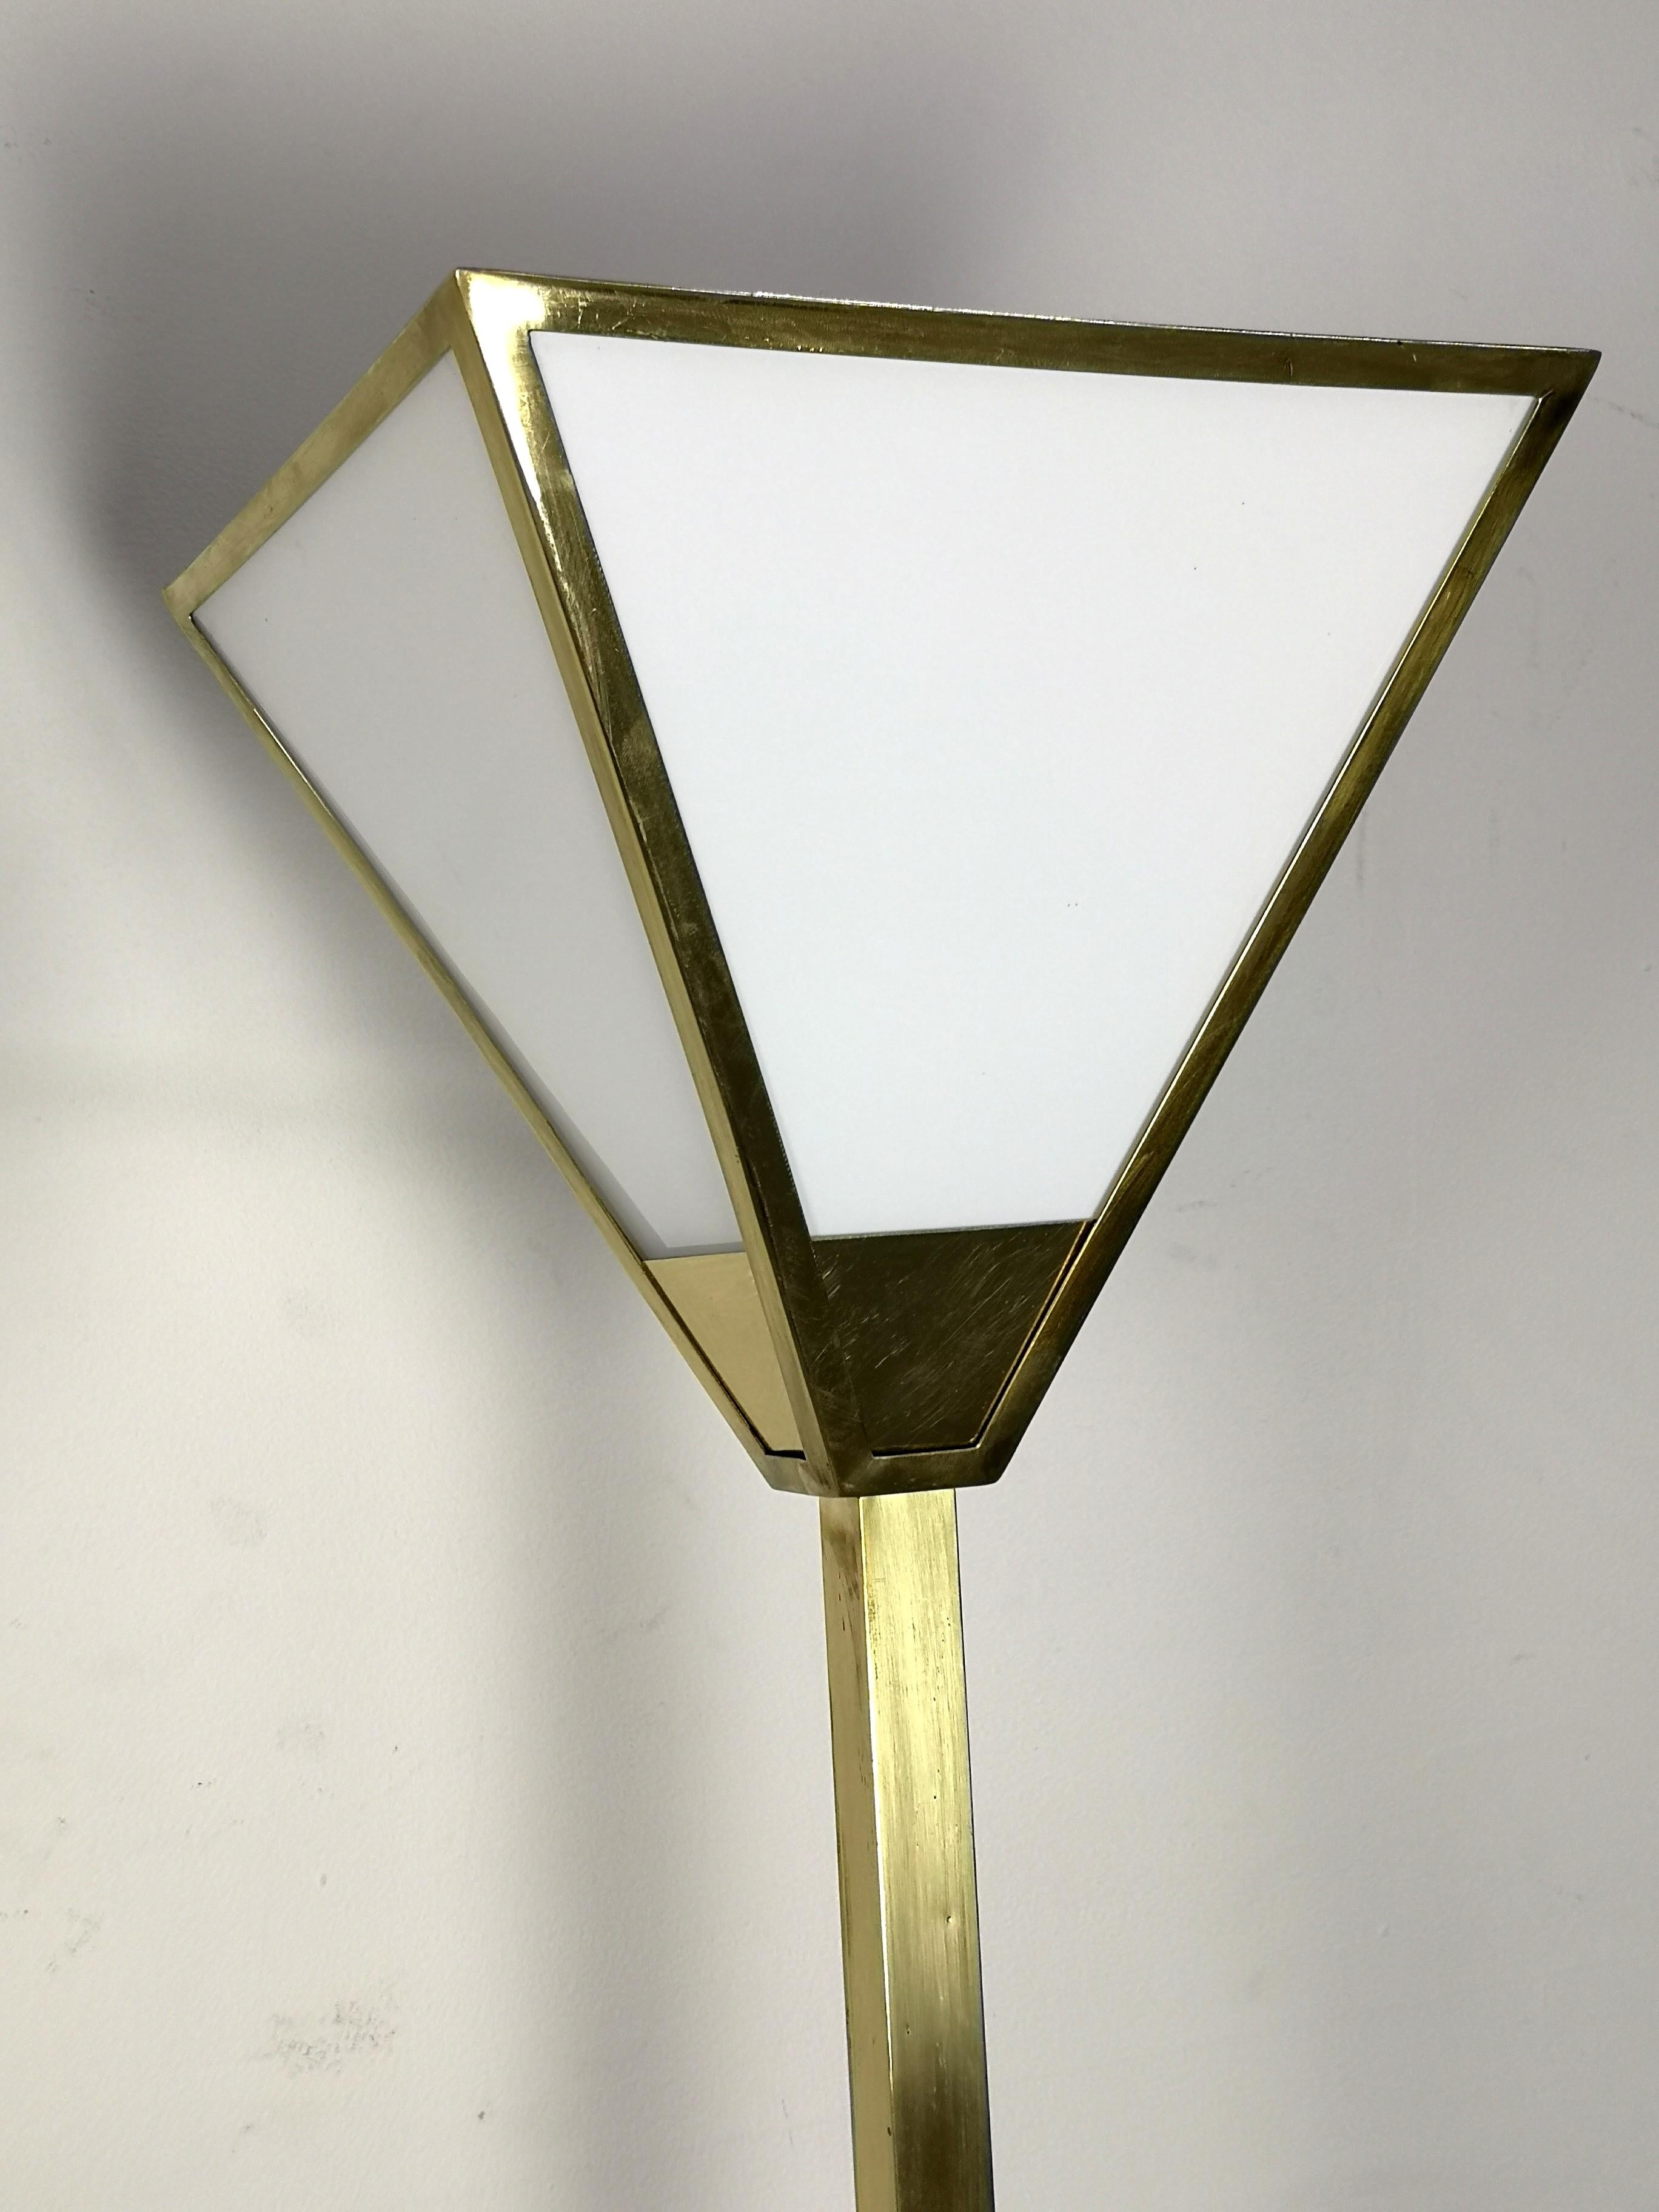 Art Deco Pair of Mid-Century Brass Standard Floor Lamps with White Glass Shades, 1970s For Sale